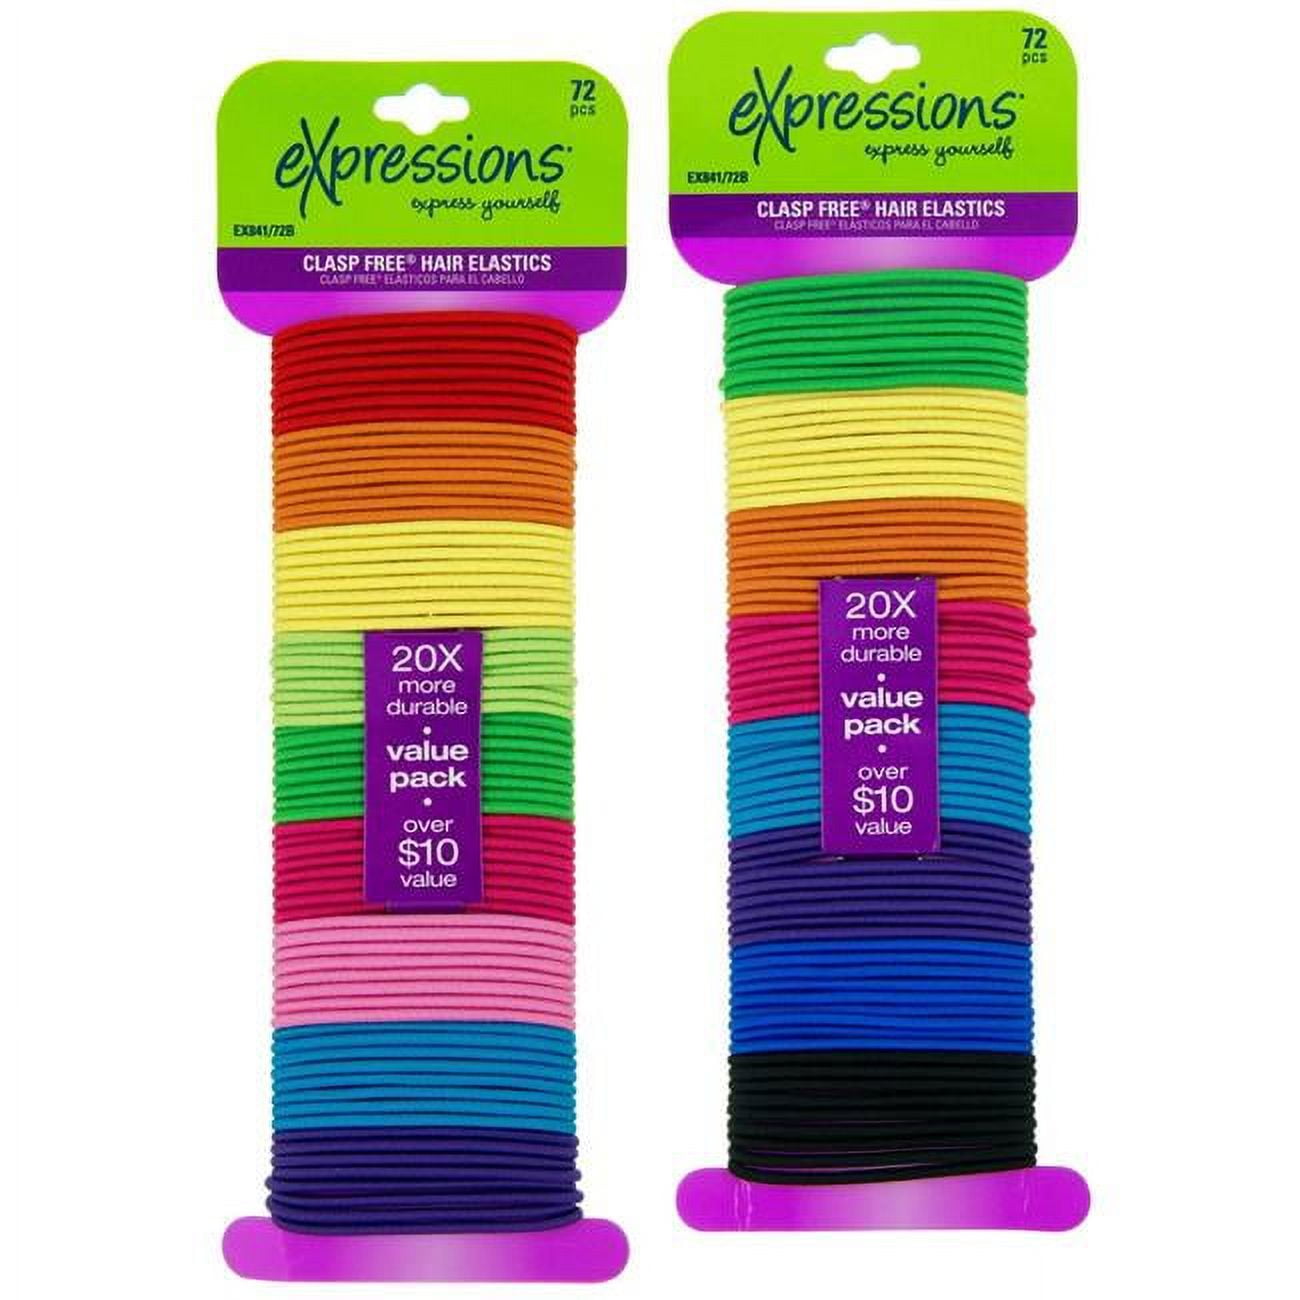 2334380 Bright No Metal Durable Elastic Band, Assorted Color - Case Of 48 - 72 Piece